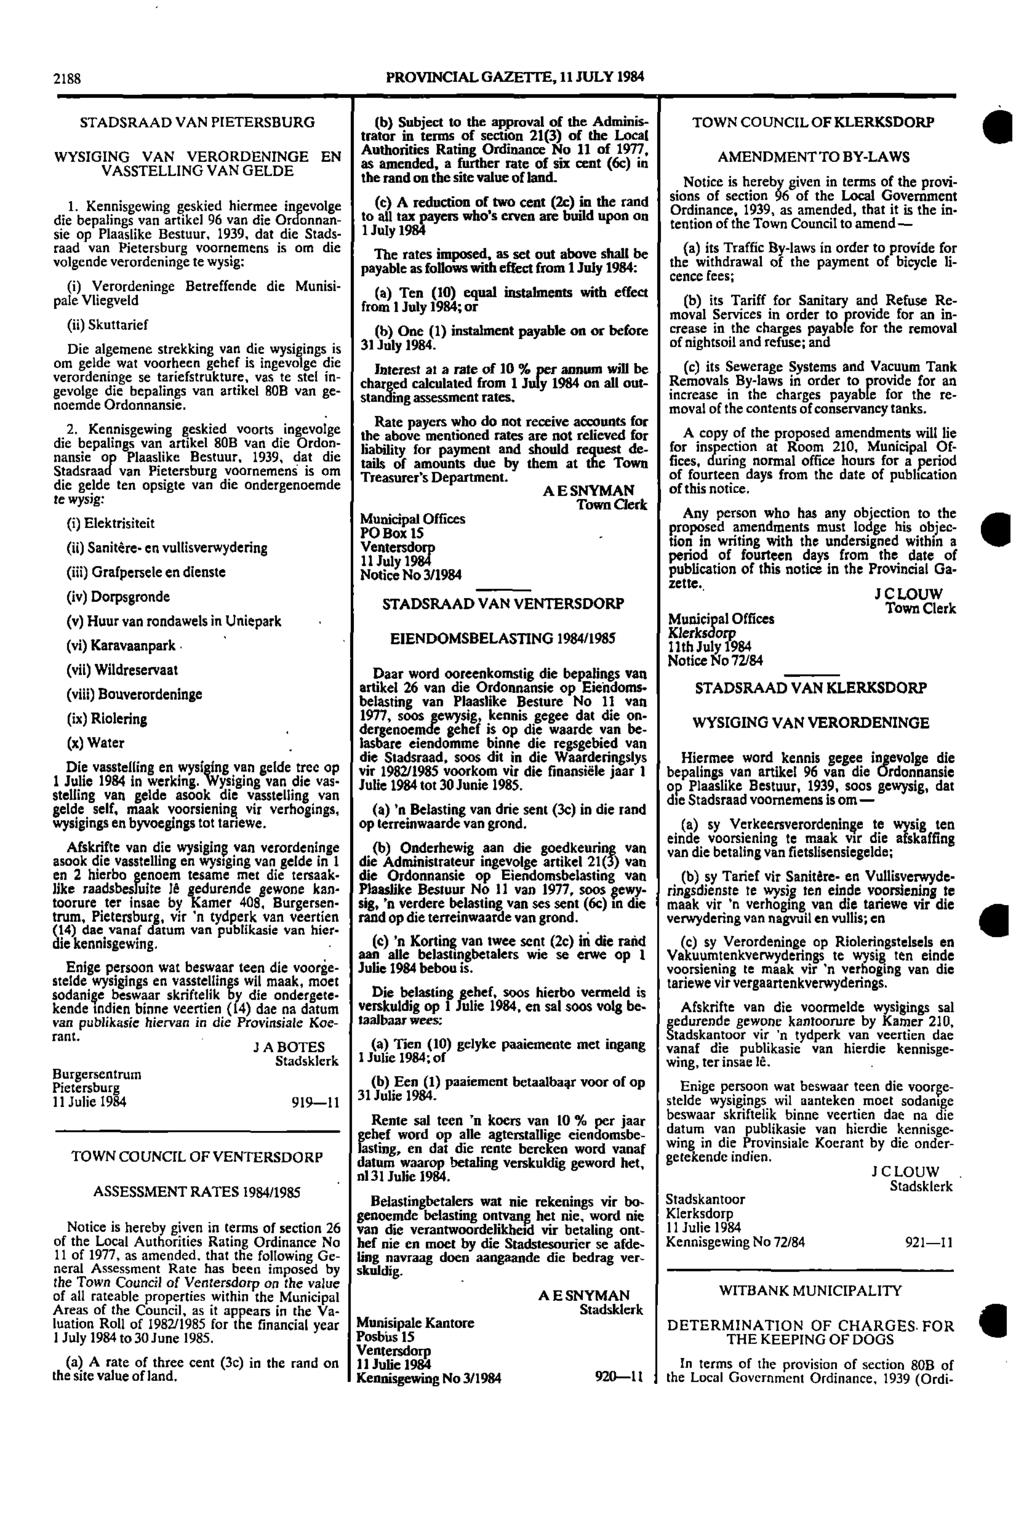 2188 PROVINCIAL GAZETTE 11 JULY 1984 STADSRAAD VAN PIETERSBURG (b) Subject to the approval of the Adminis TOWN COUNCIL OF KLERKSDORP trator in terms of section 21(3) of the Local Authorities Rating